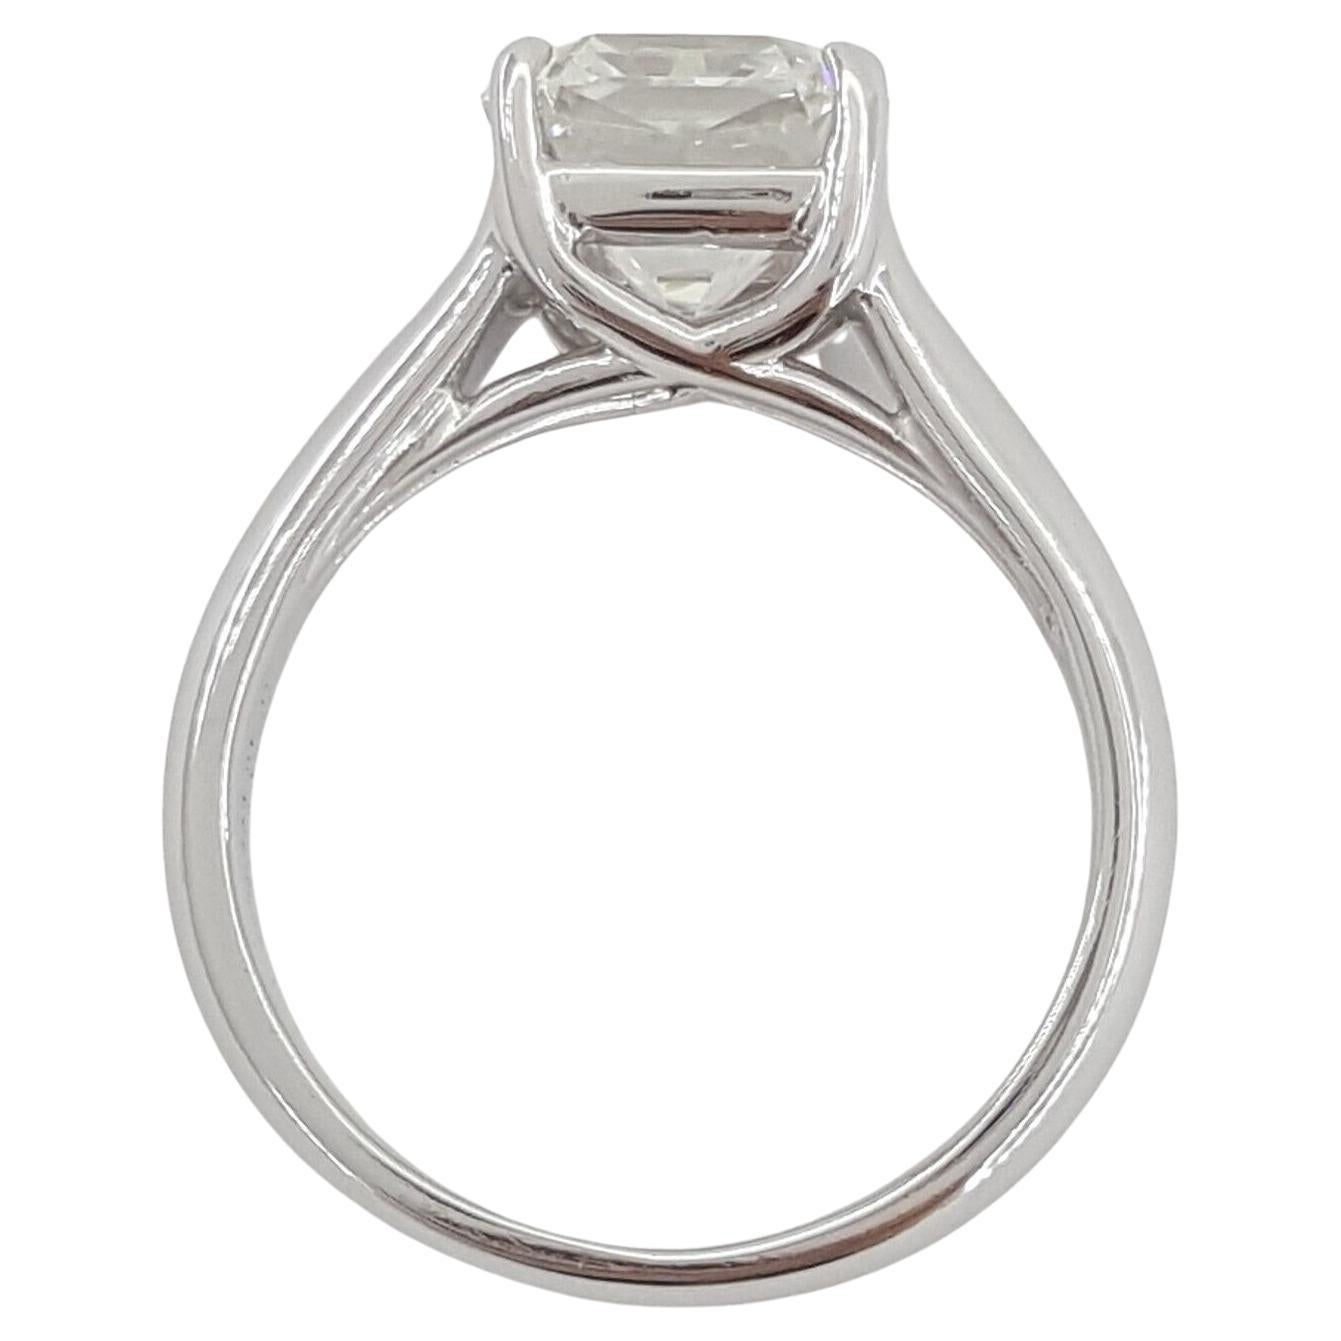  Tiffany & Co. 2.16 ct Platinum Lucida Square Brilliant Cut Diamond Solitaire Engagement Ring. 



The ring weighs 6.1 grams, size 4.5, the center stone is a Natural Lucida Cut-Cornered Square Brilliant Cut diamond weighing 2.16 ct, G in color, VVS2